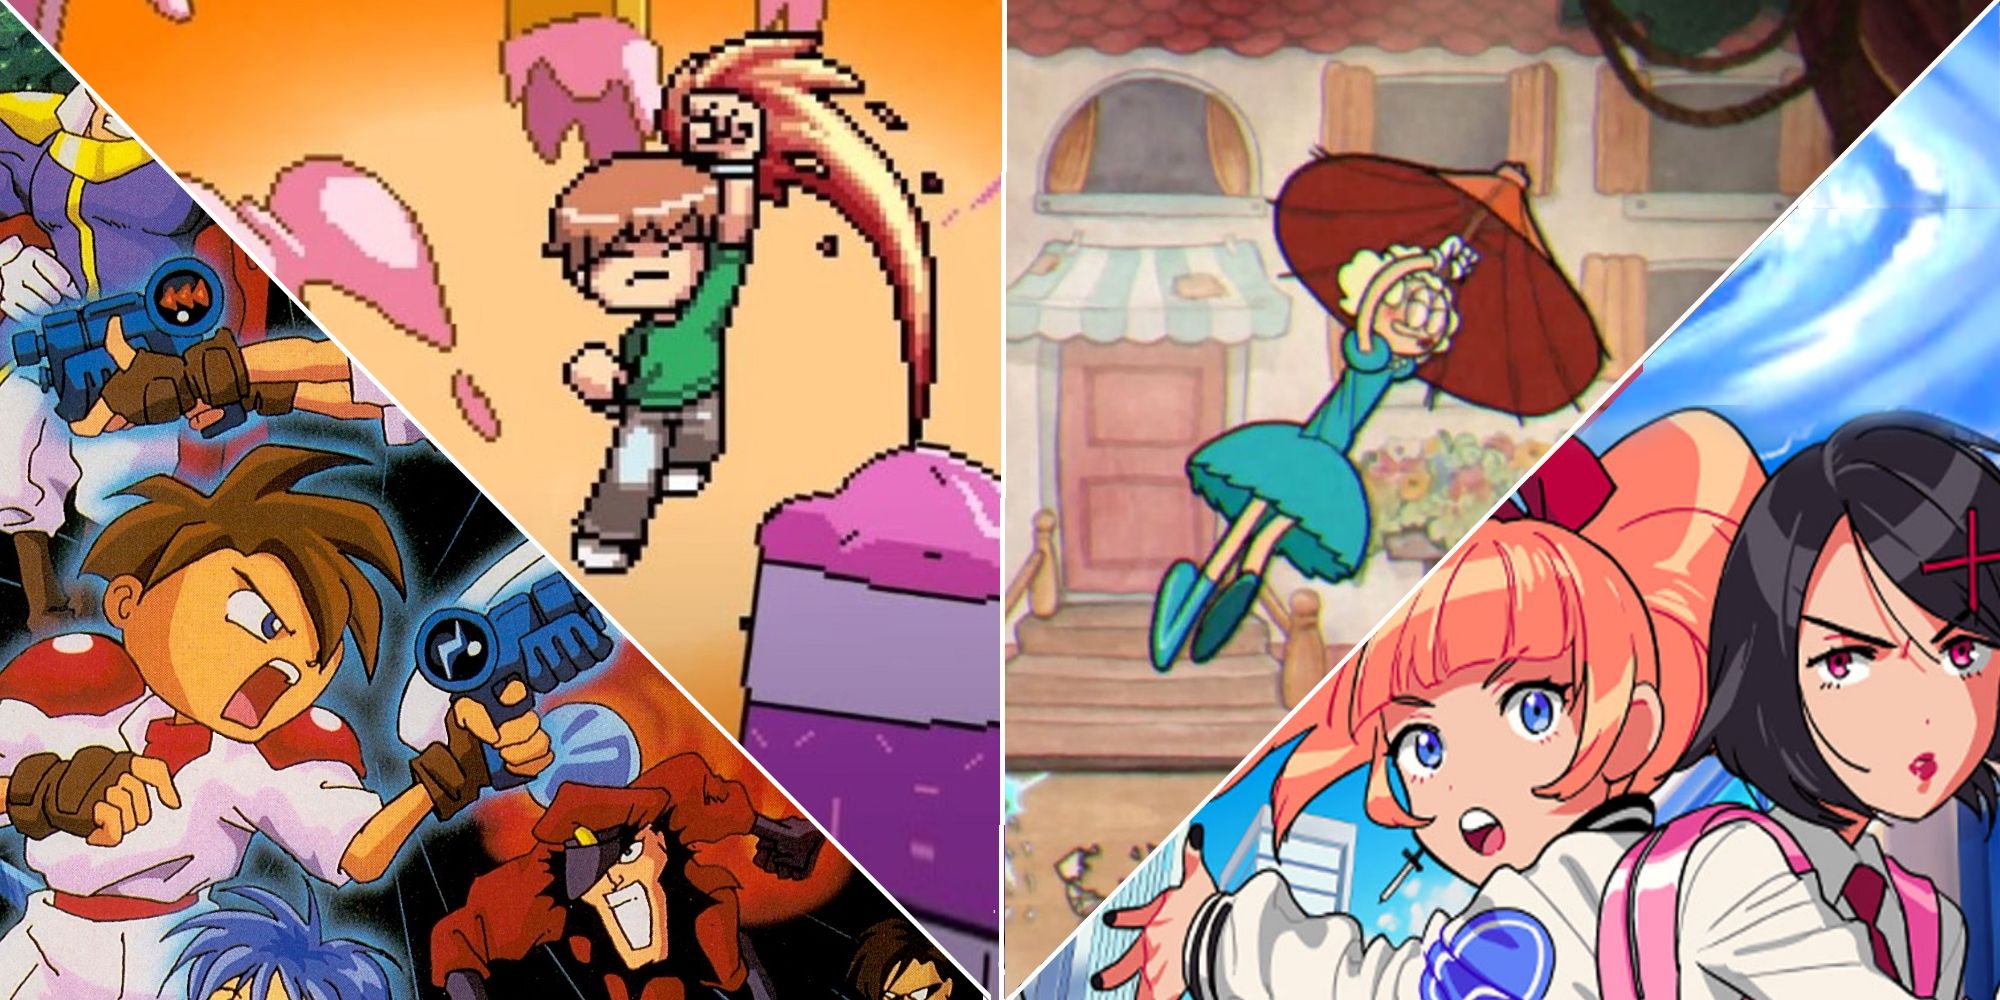 Street Fighter Homage Featured Image (with art from Gunstar Heroes' and River City Girls' covers, as well as a Cuphead image showing Sally Stageplay doing a Yoga Drill and Scott Pilgrim Vs. The World image of Scott performing a Shoryuken)